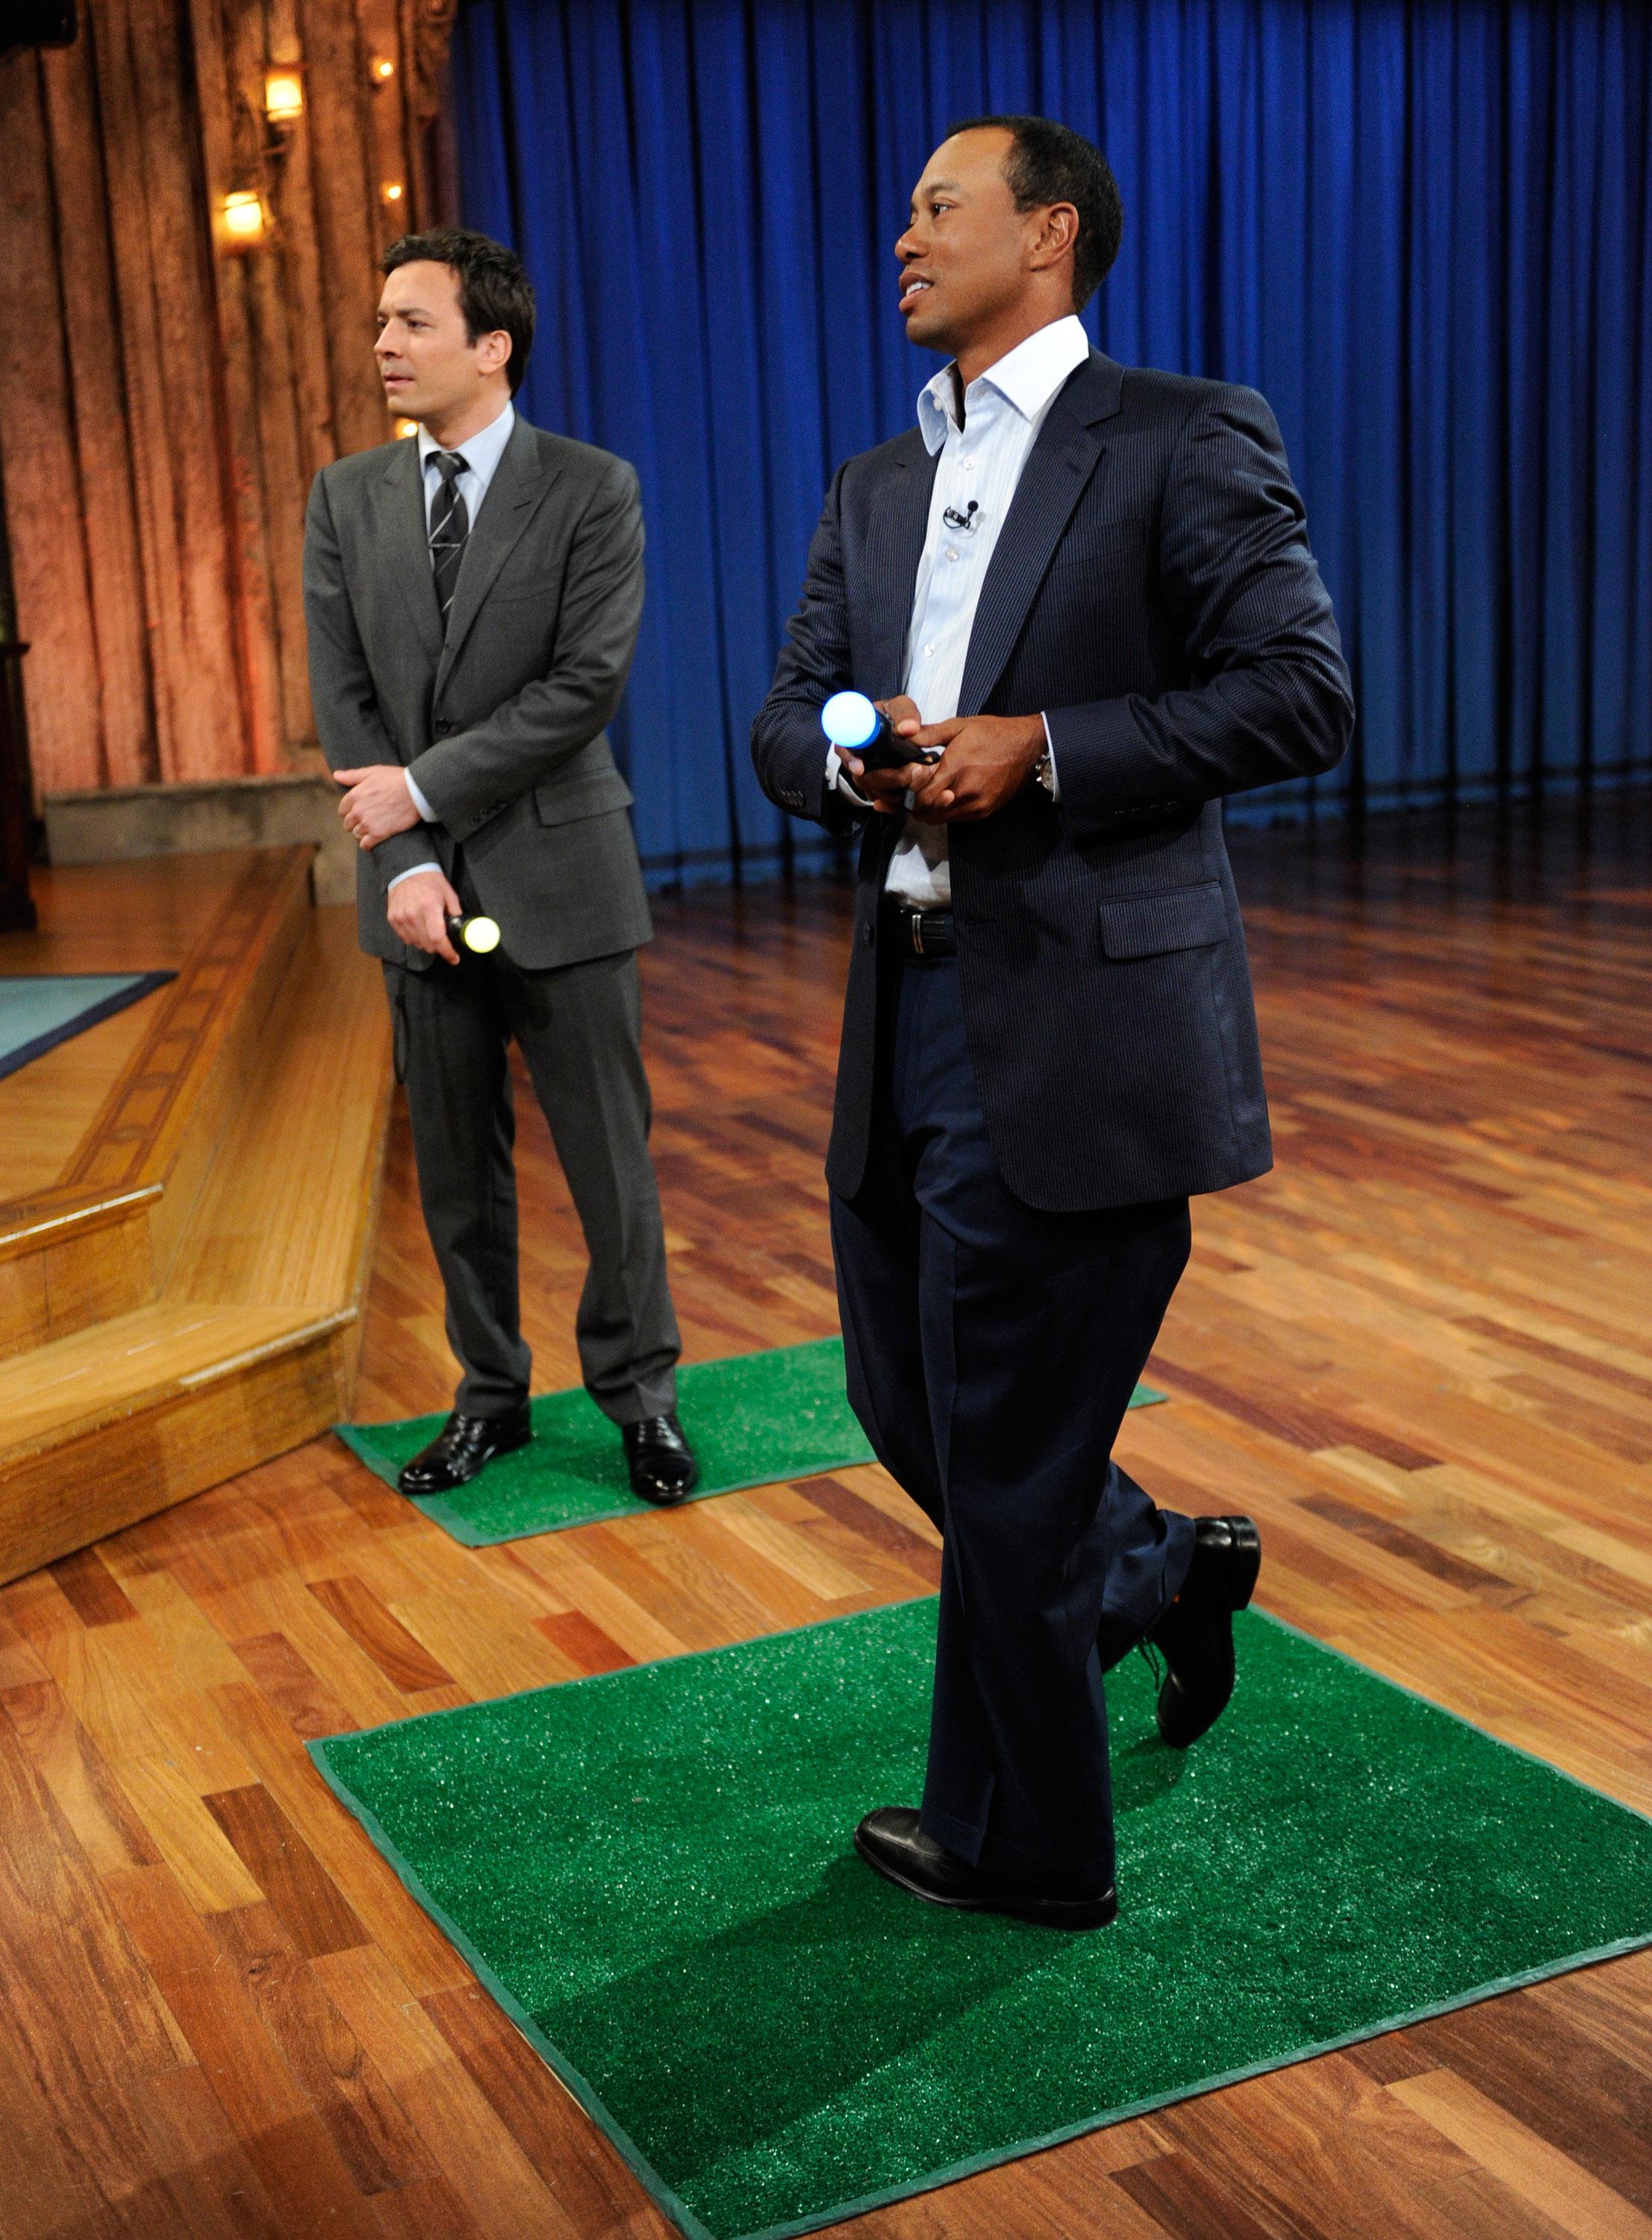 Celebrities Visit 'Late Night With Jimmy Fallon' - March 16, 2011